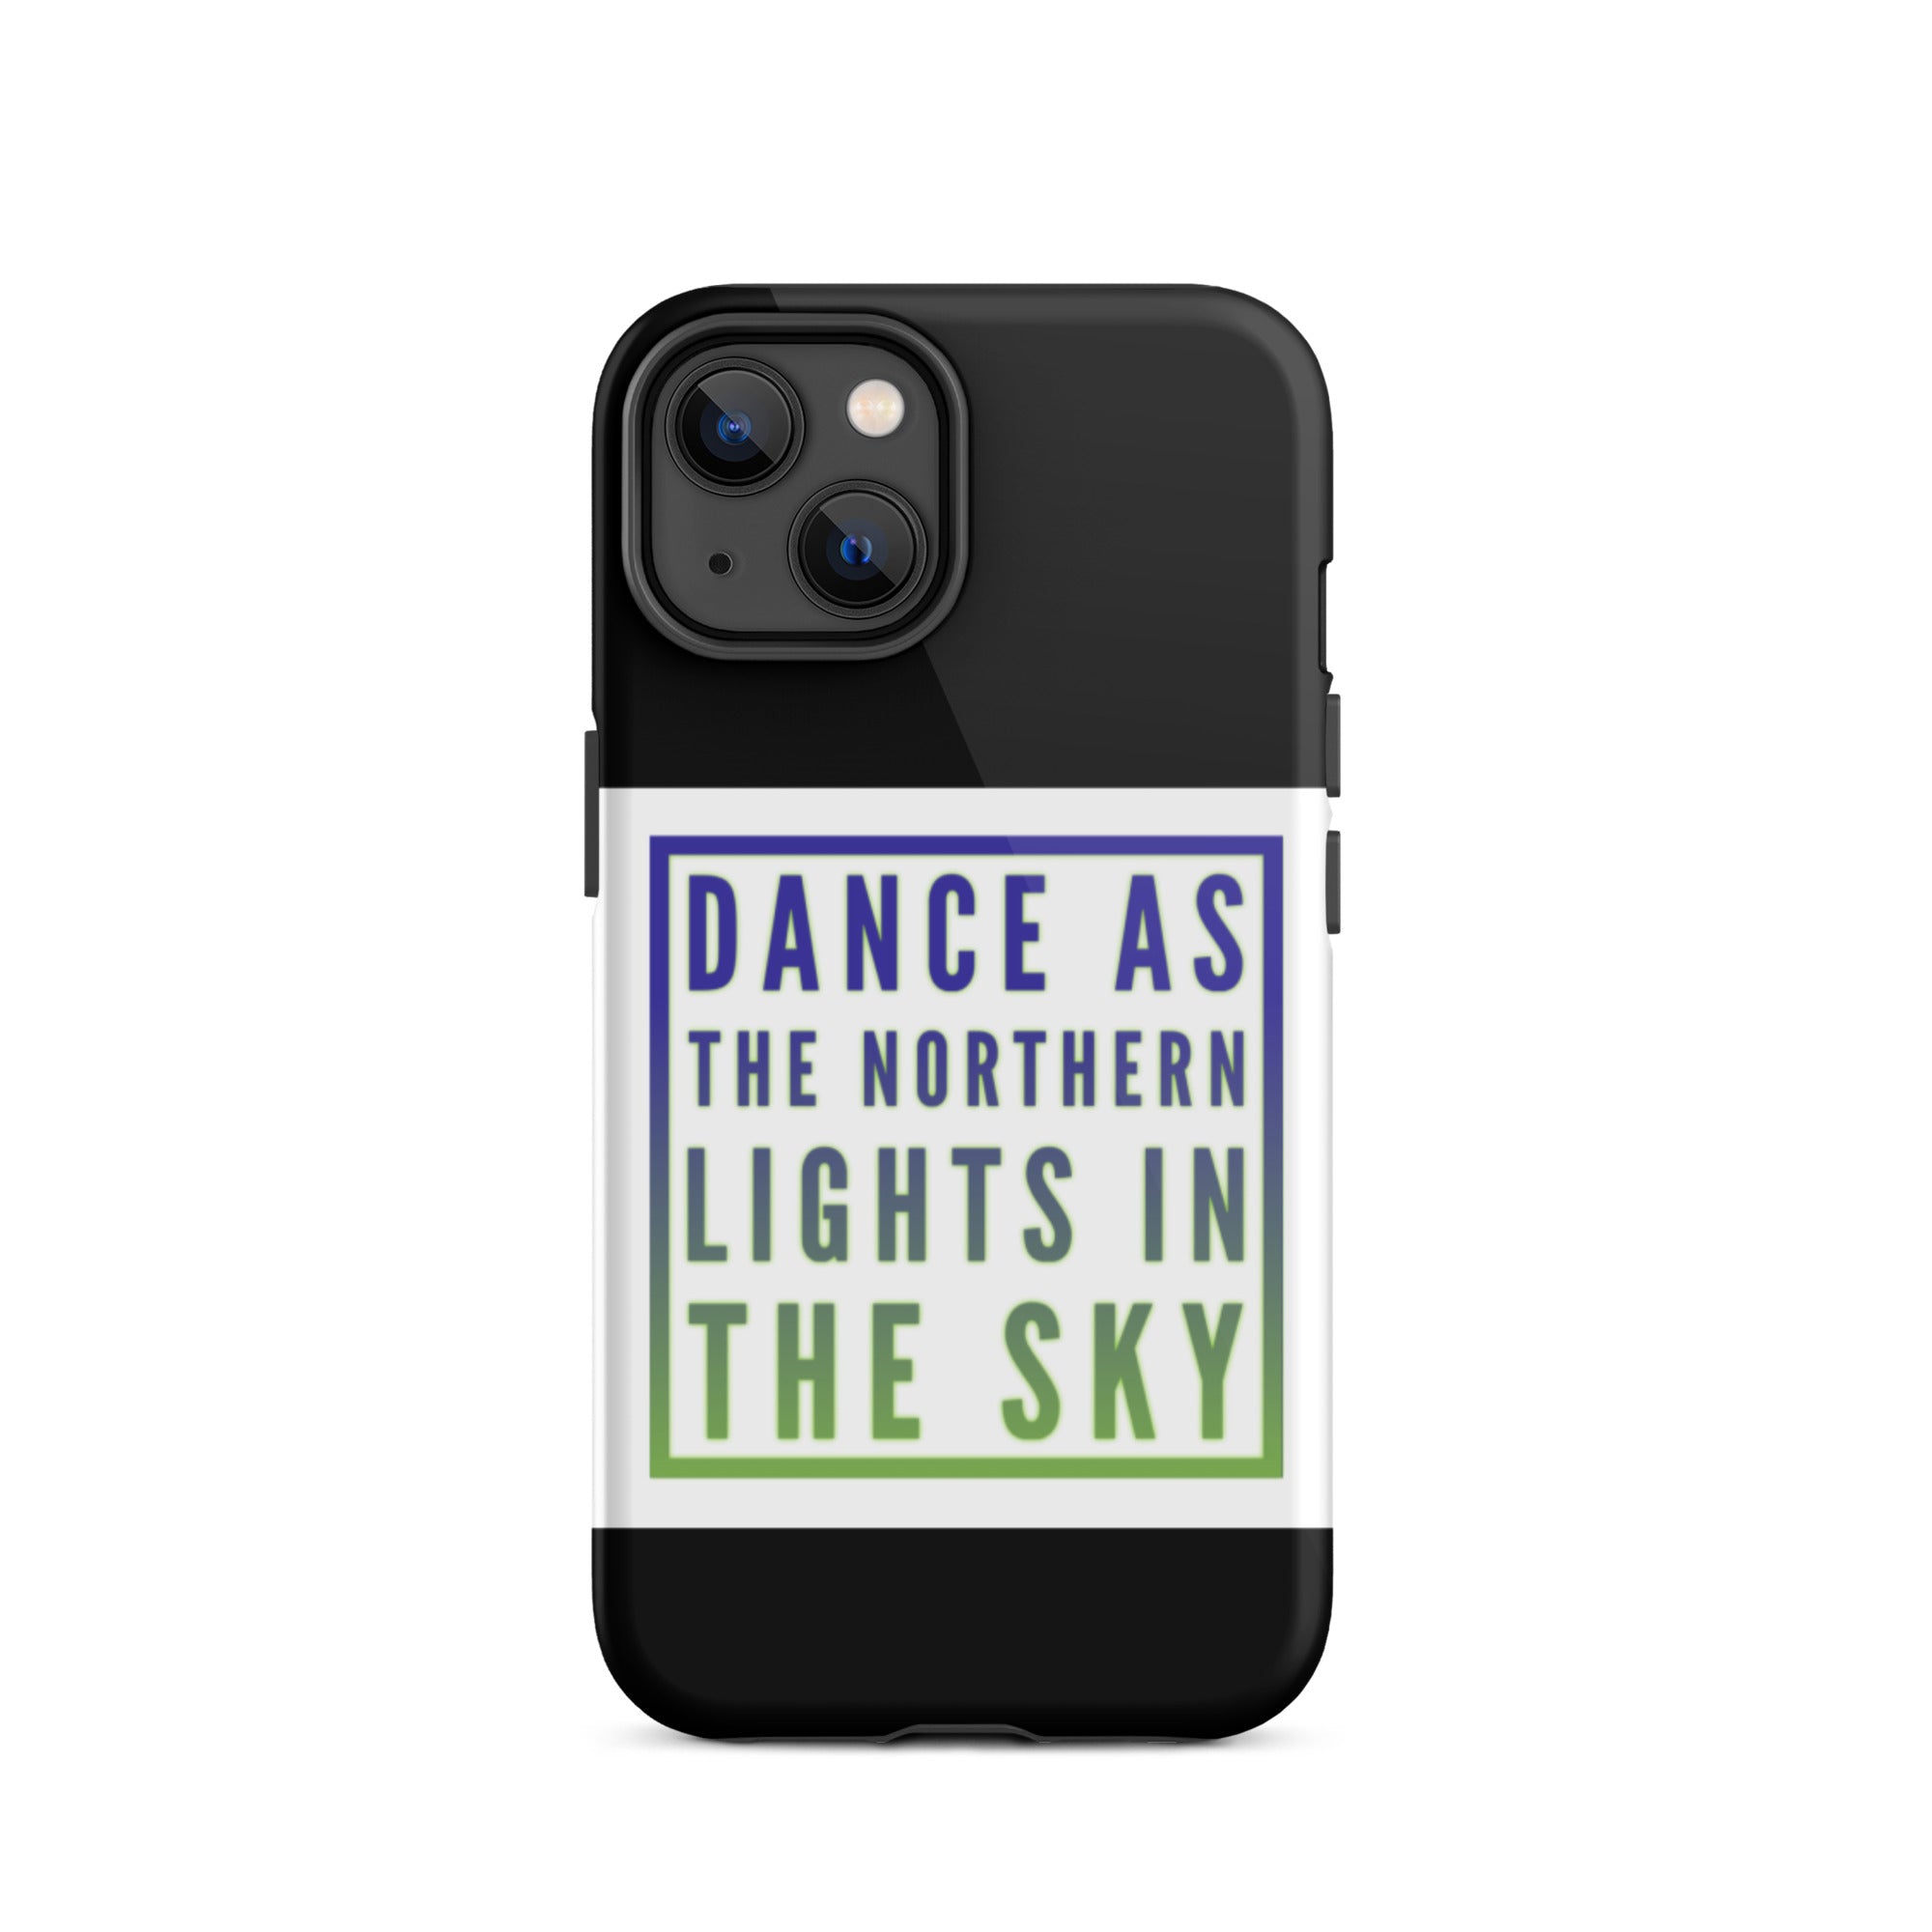 GloWell Designs - Tough iPhone Case - Motivational Quote - Dance As The Northern Lights